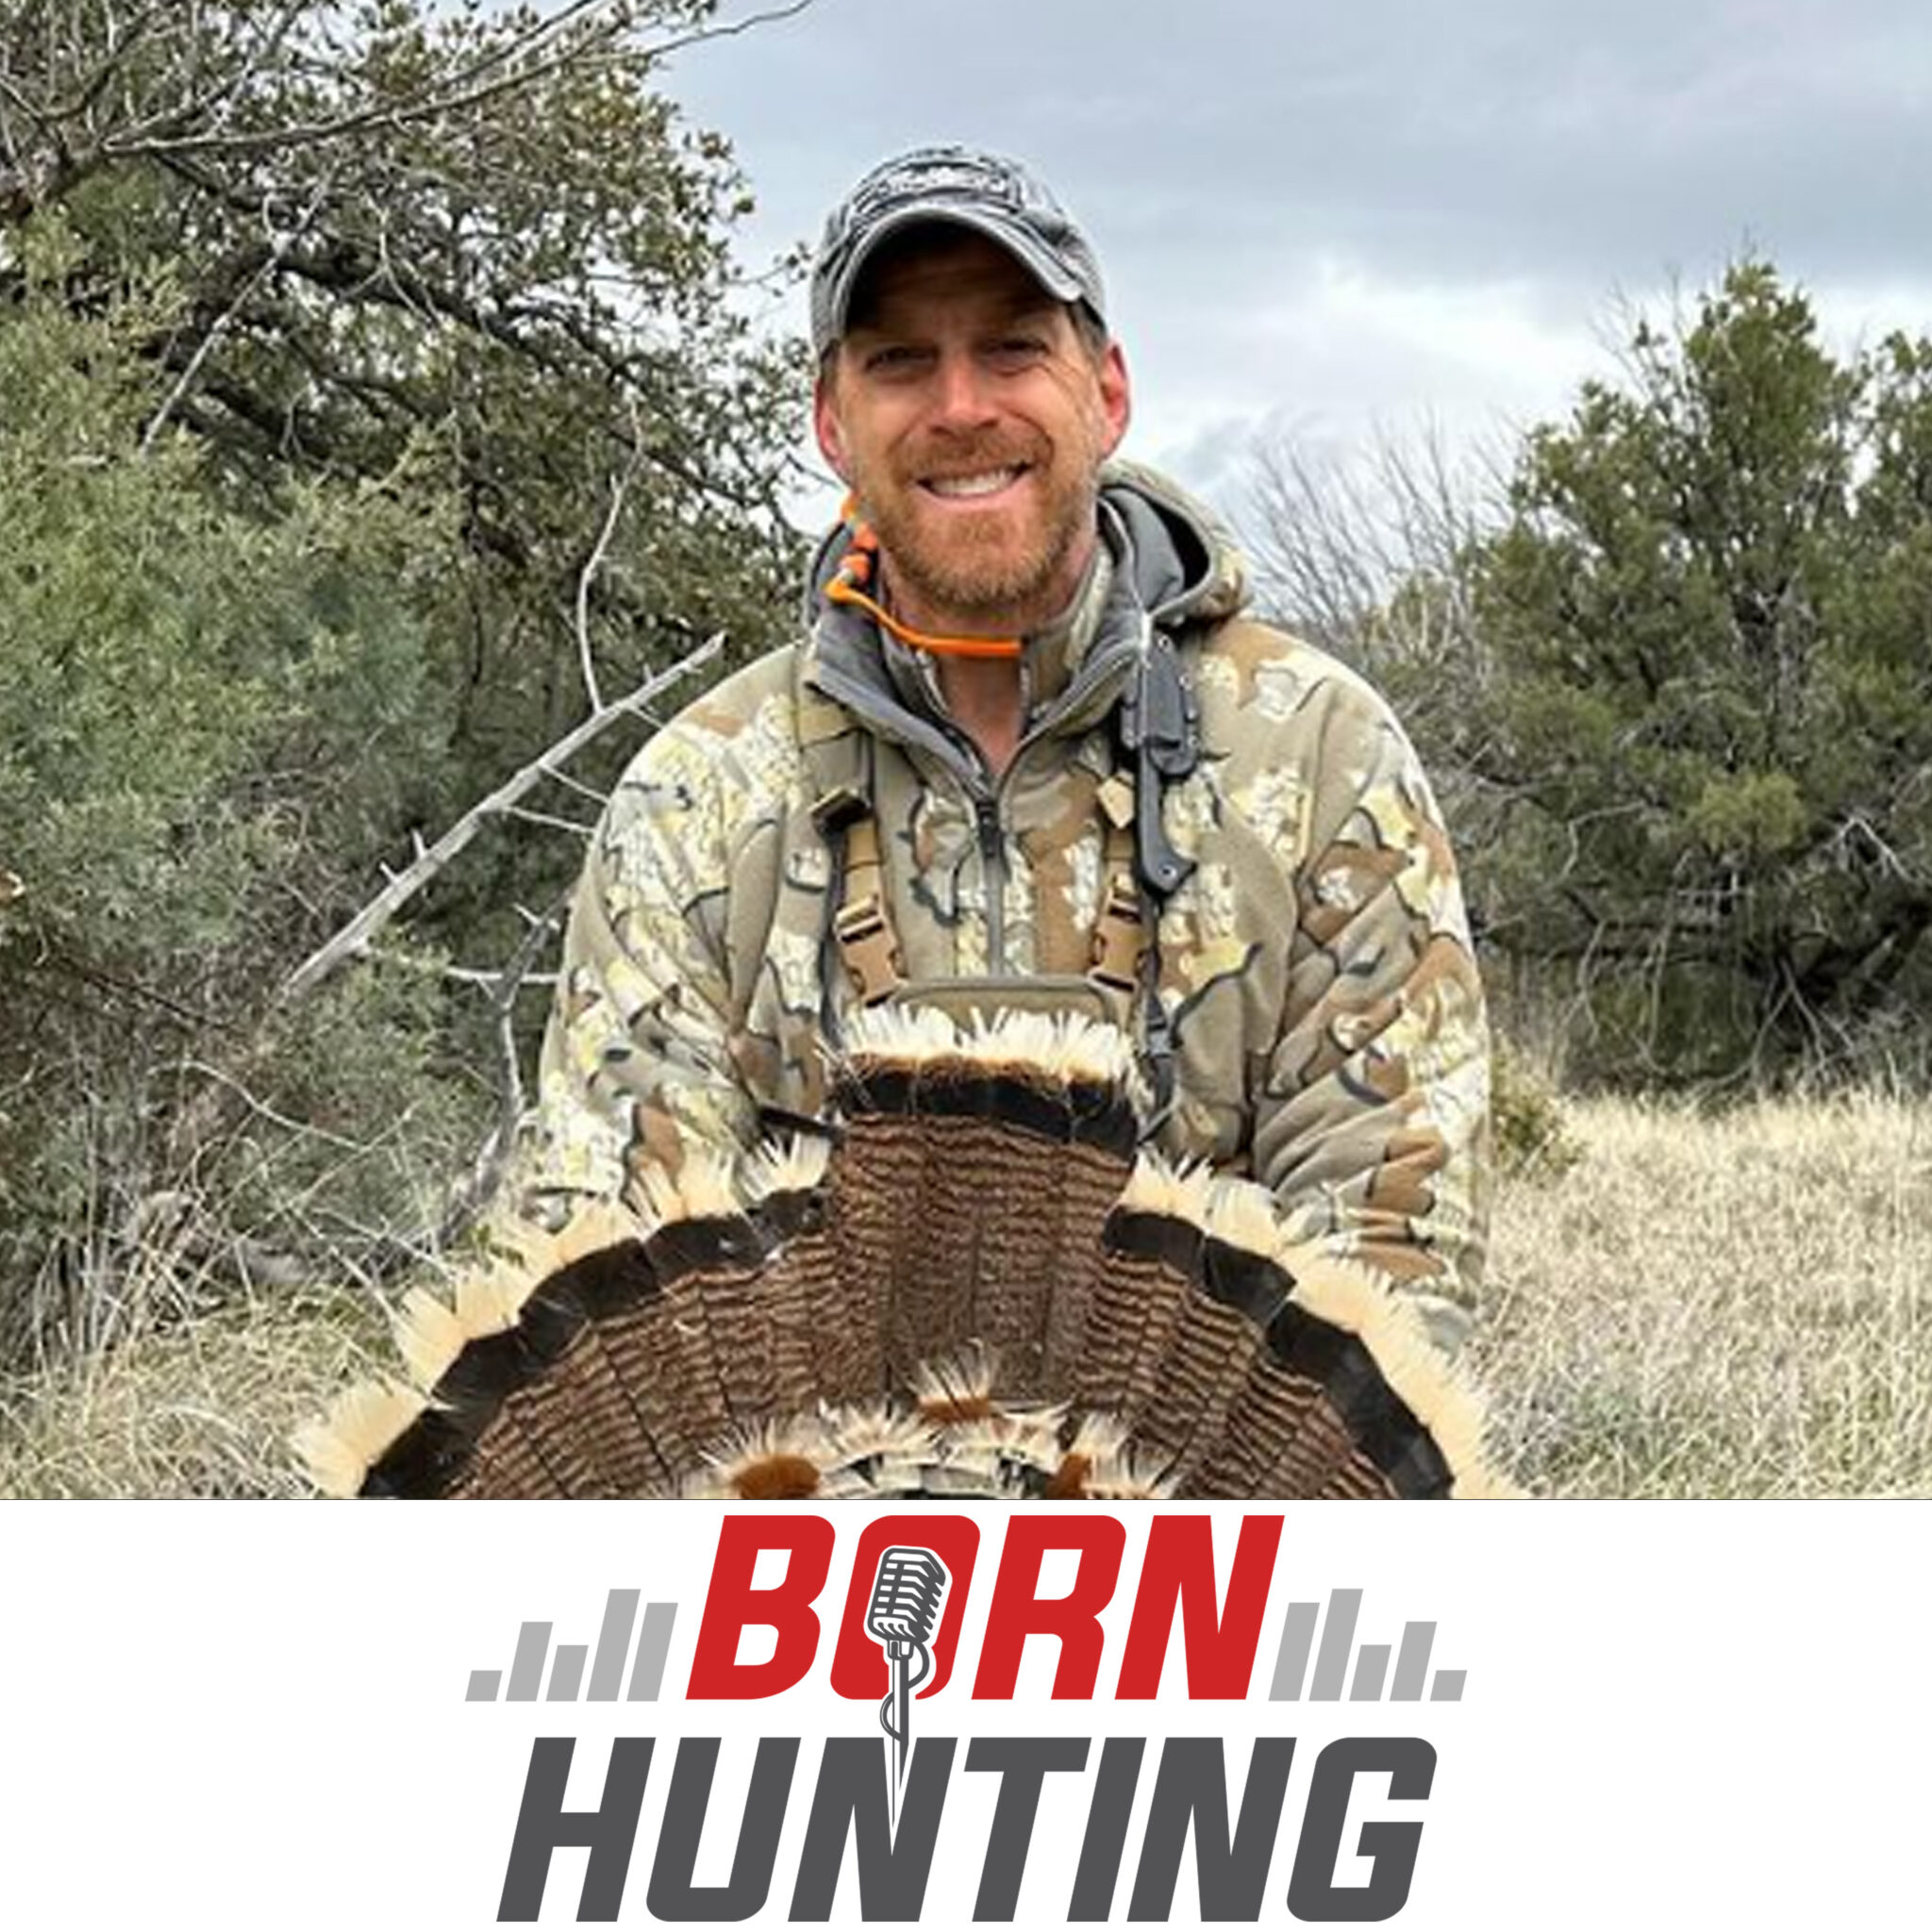 Ep. 15 – John Stallone: The Hunting Community Must Unify